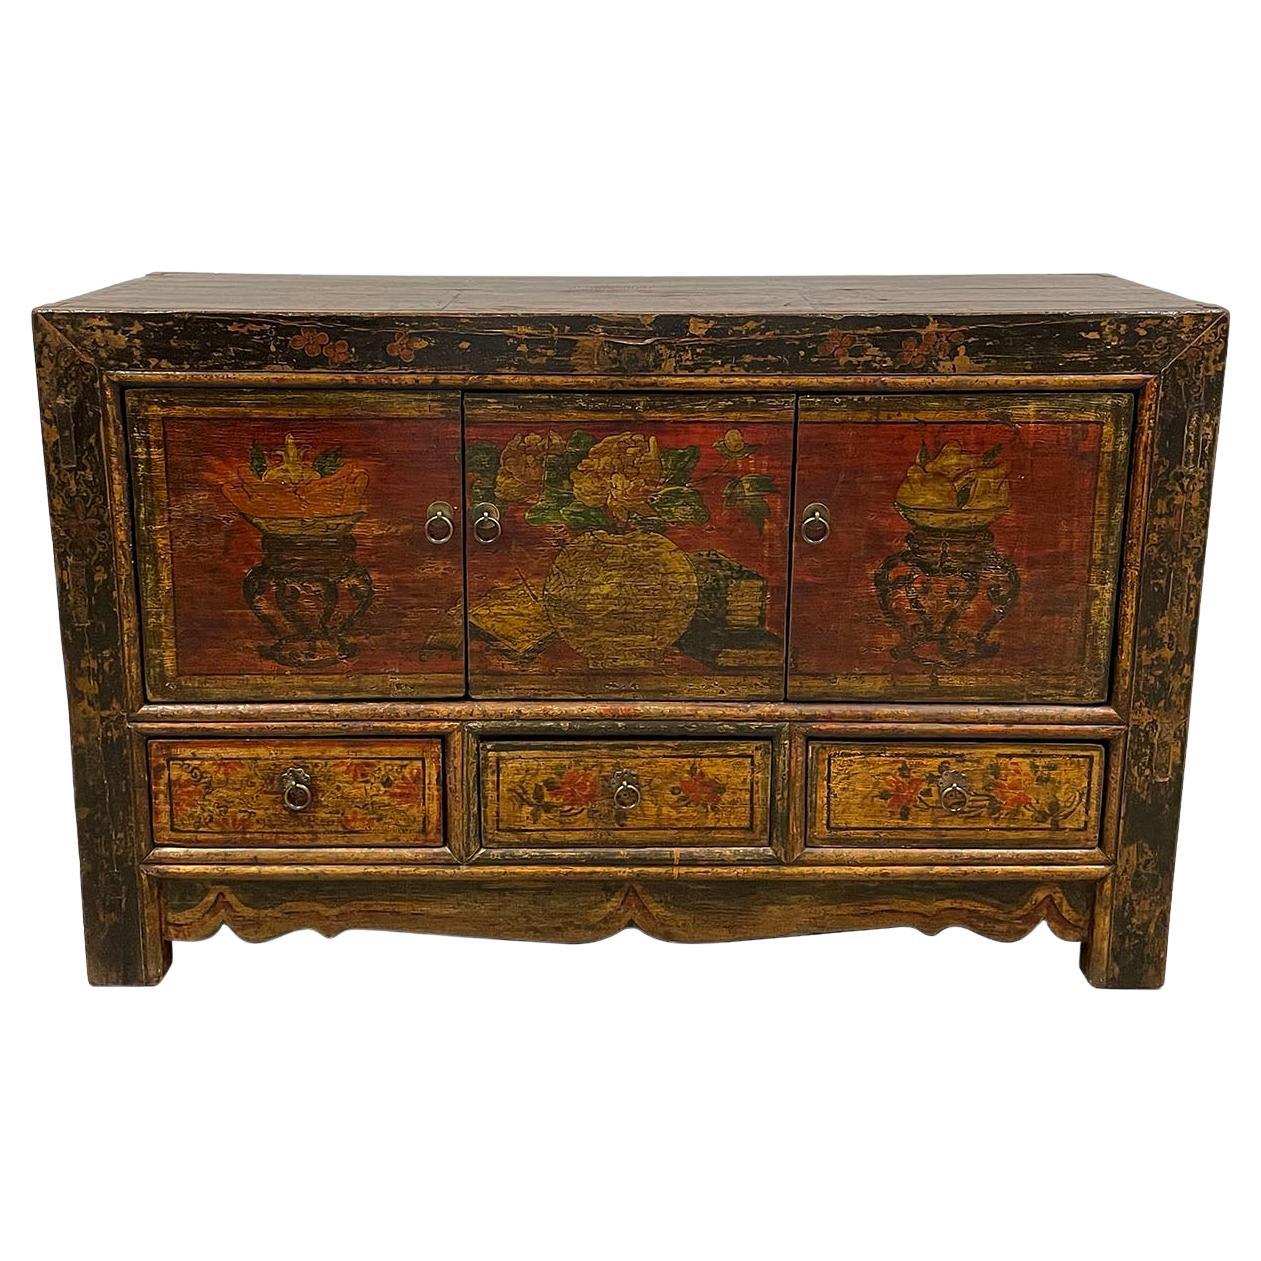 Late 19th Century Antique Chinese Mongolia Cabinet Credenza